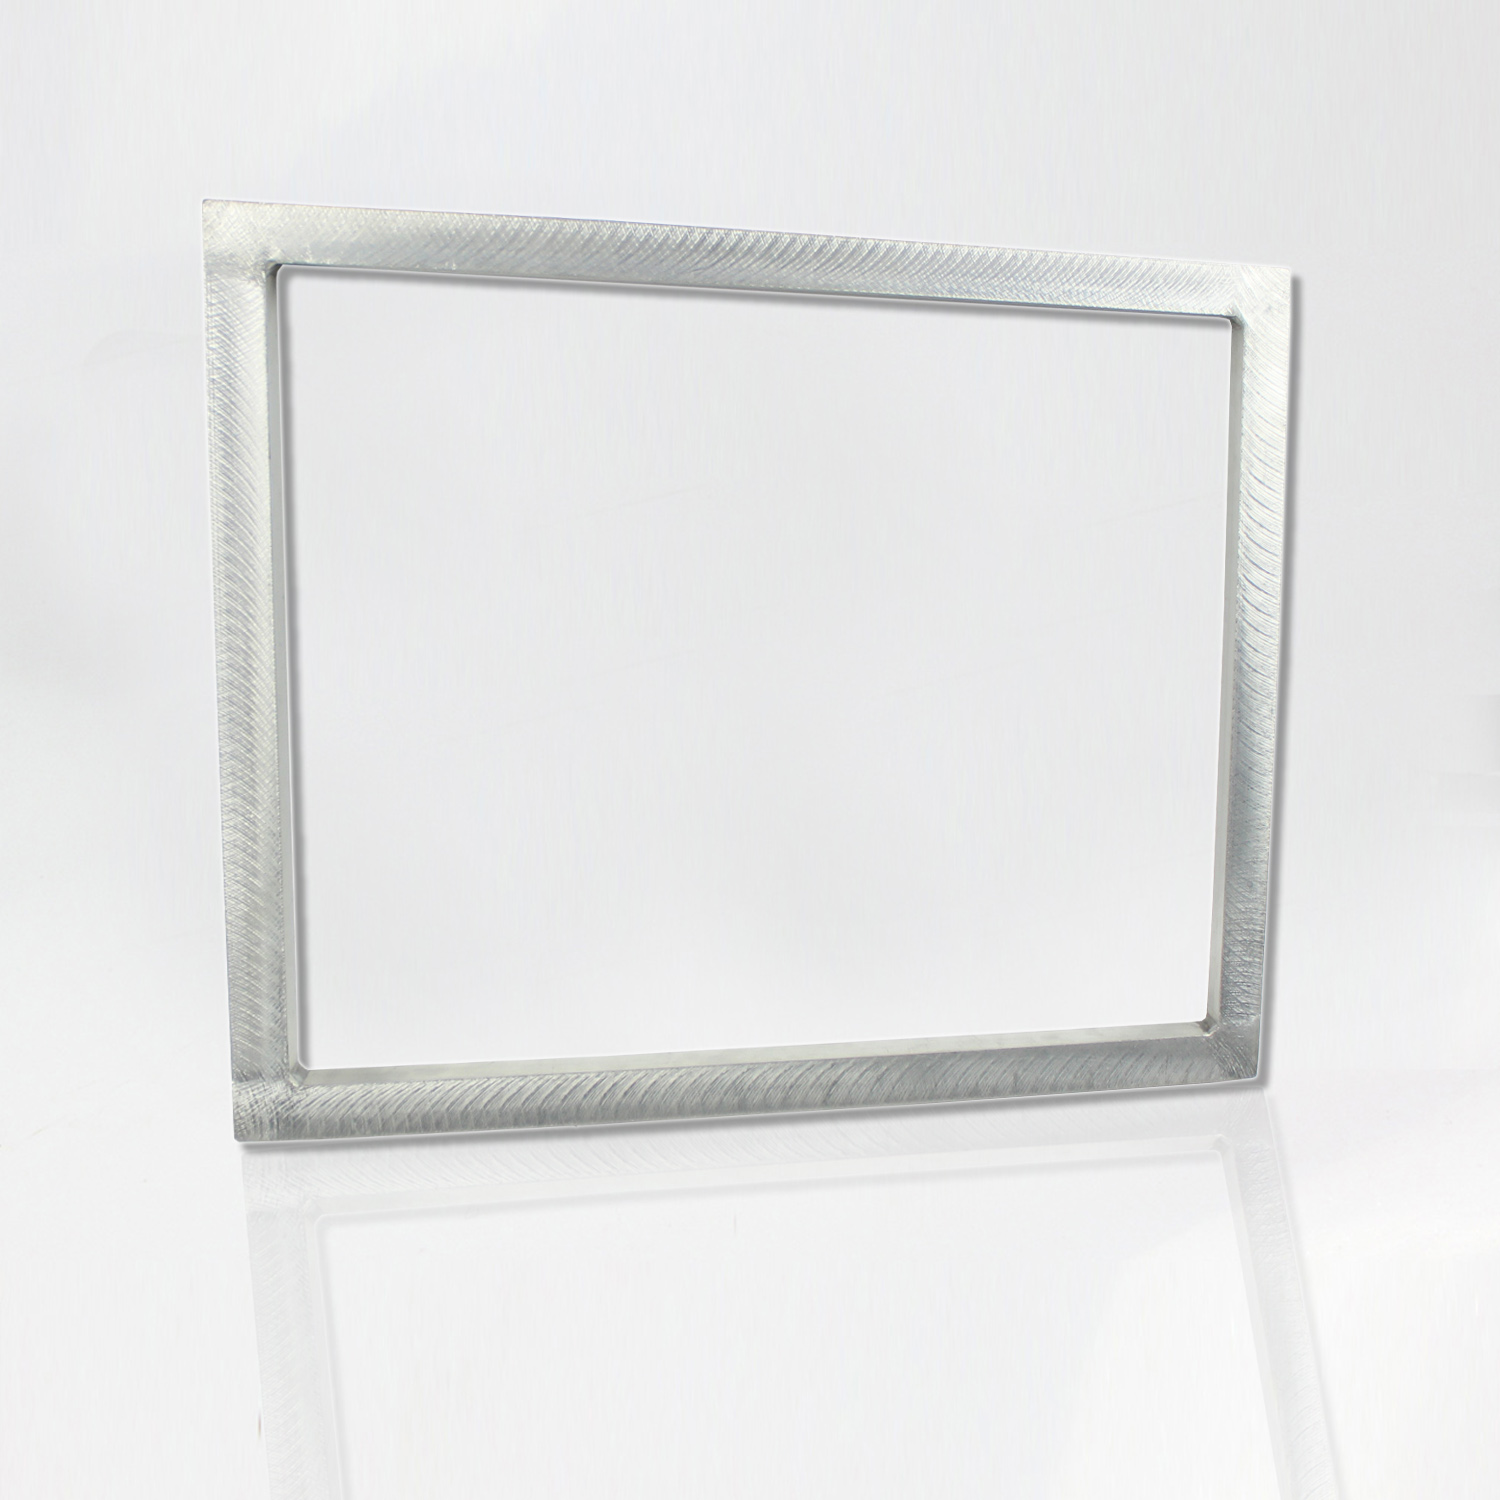 Aluminum Screen Printing Frames for Silk Screen Printing 8”x12”(Frame Only) Featured Image